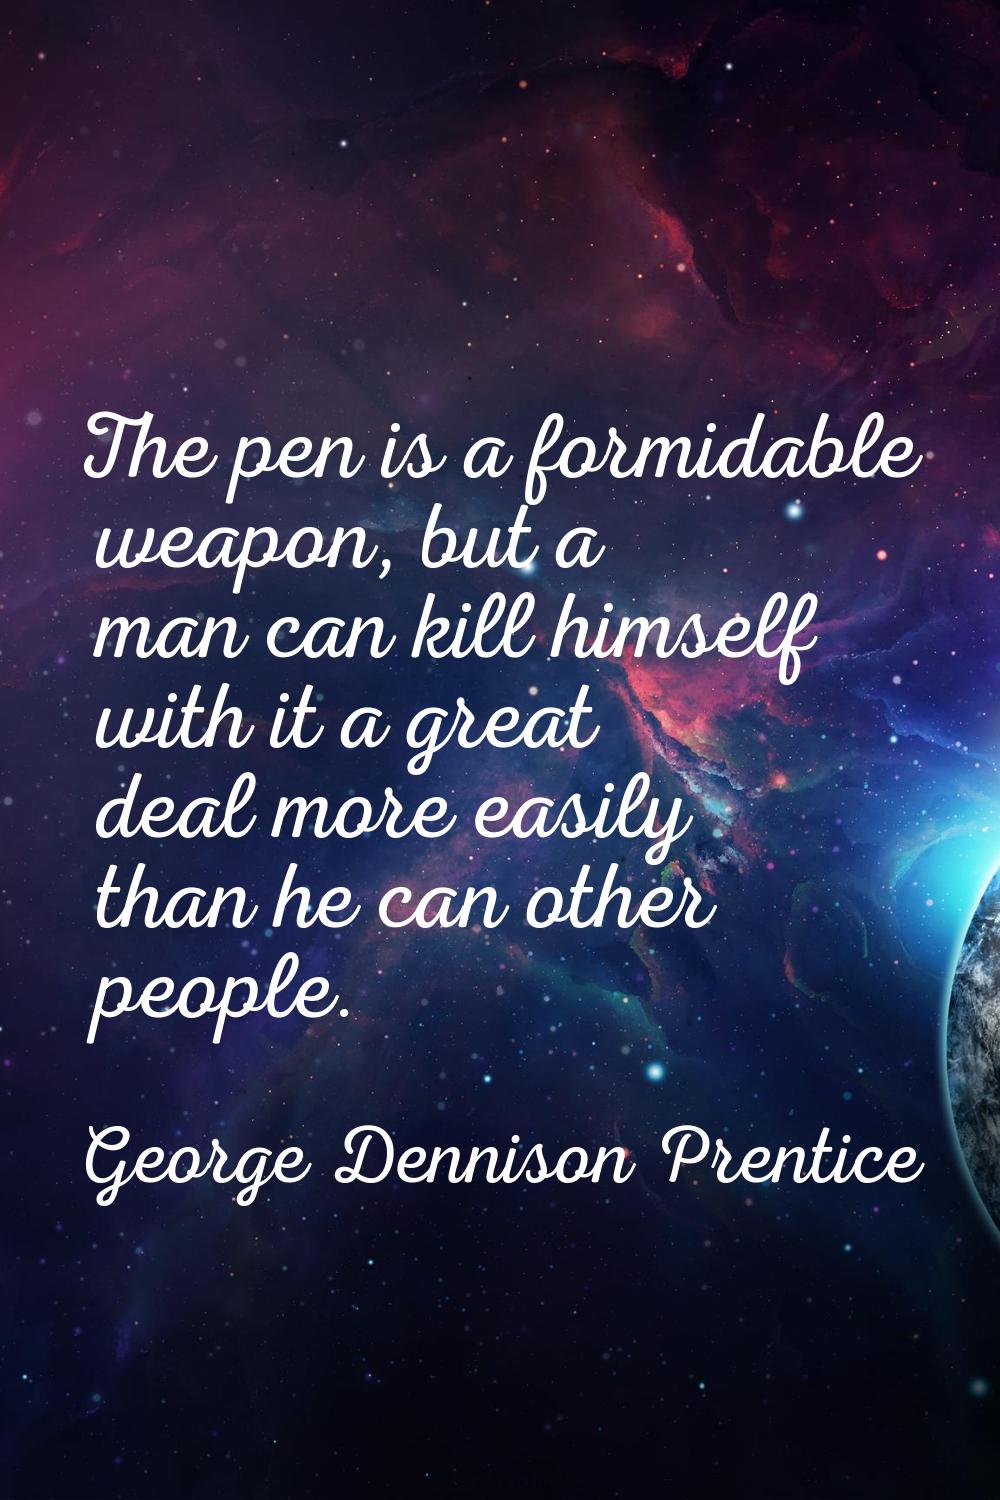 The pen is a formidable weapon, but a man can kill himself with it a great deal more easily than he